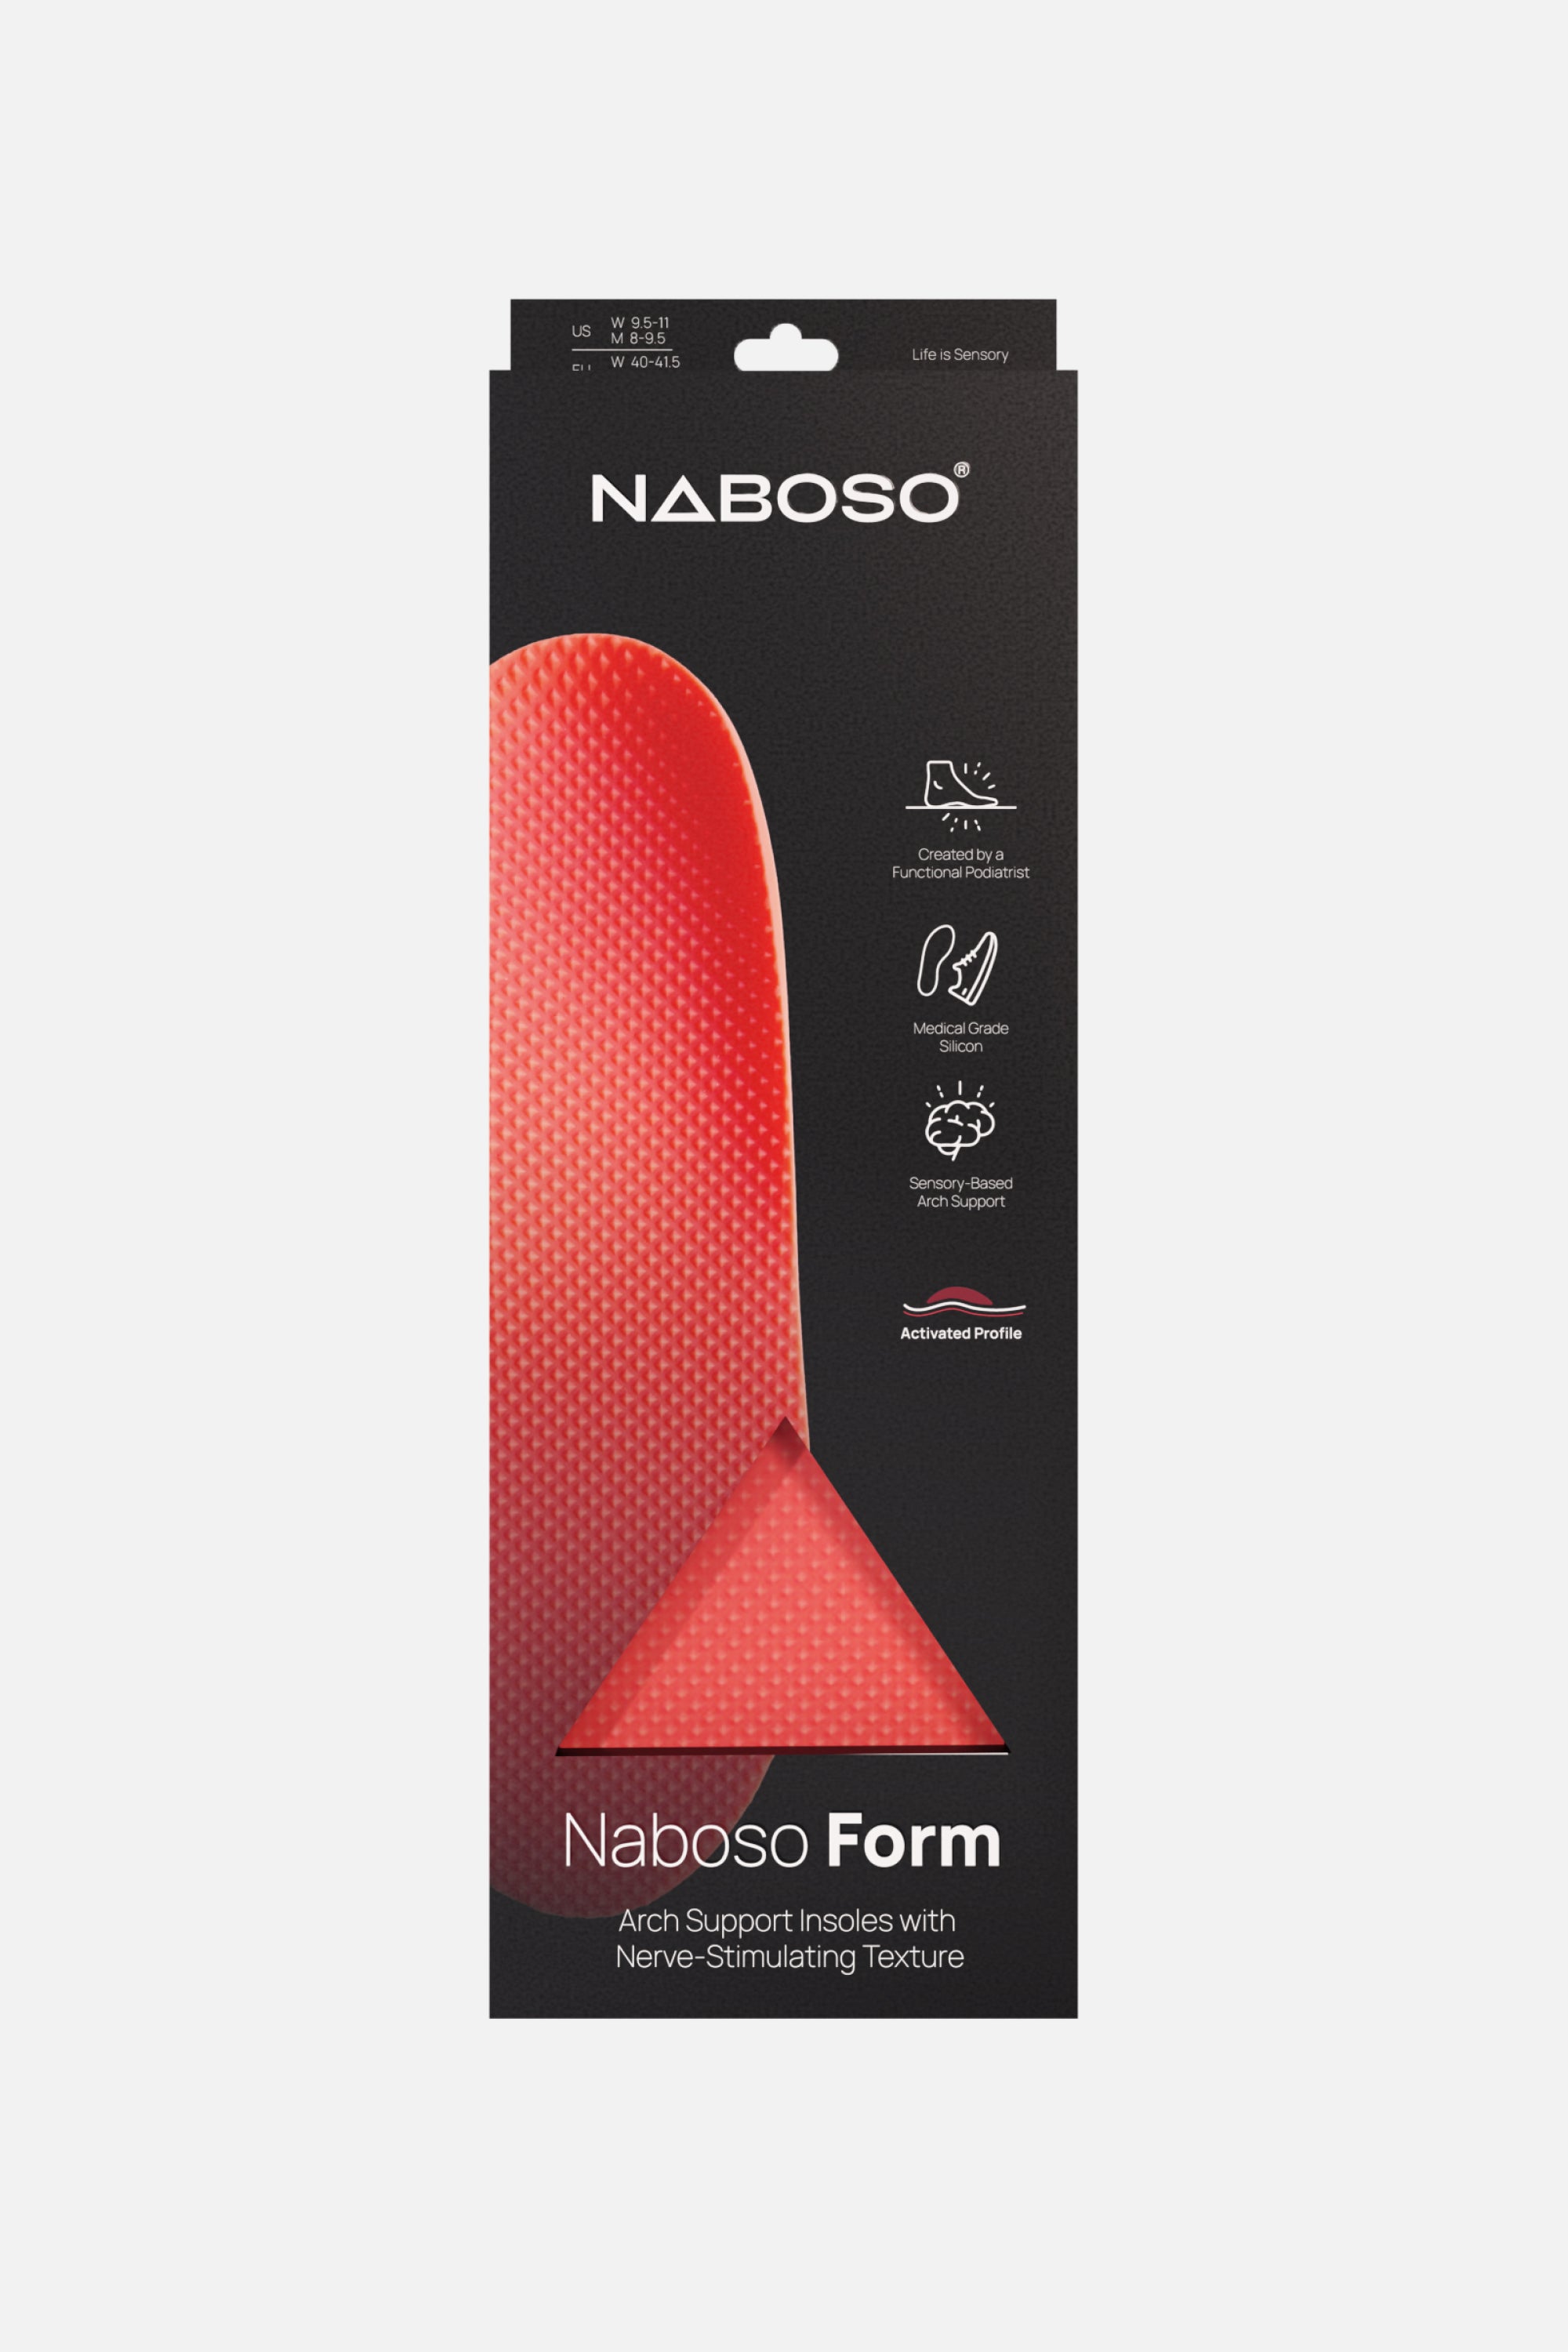 Naboso Standing Mat to Improve Foot Awareness at Home, Office or Gym –  Naboso EU